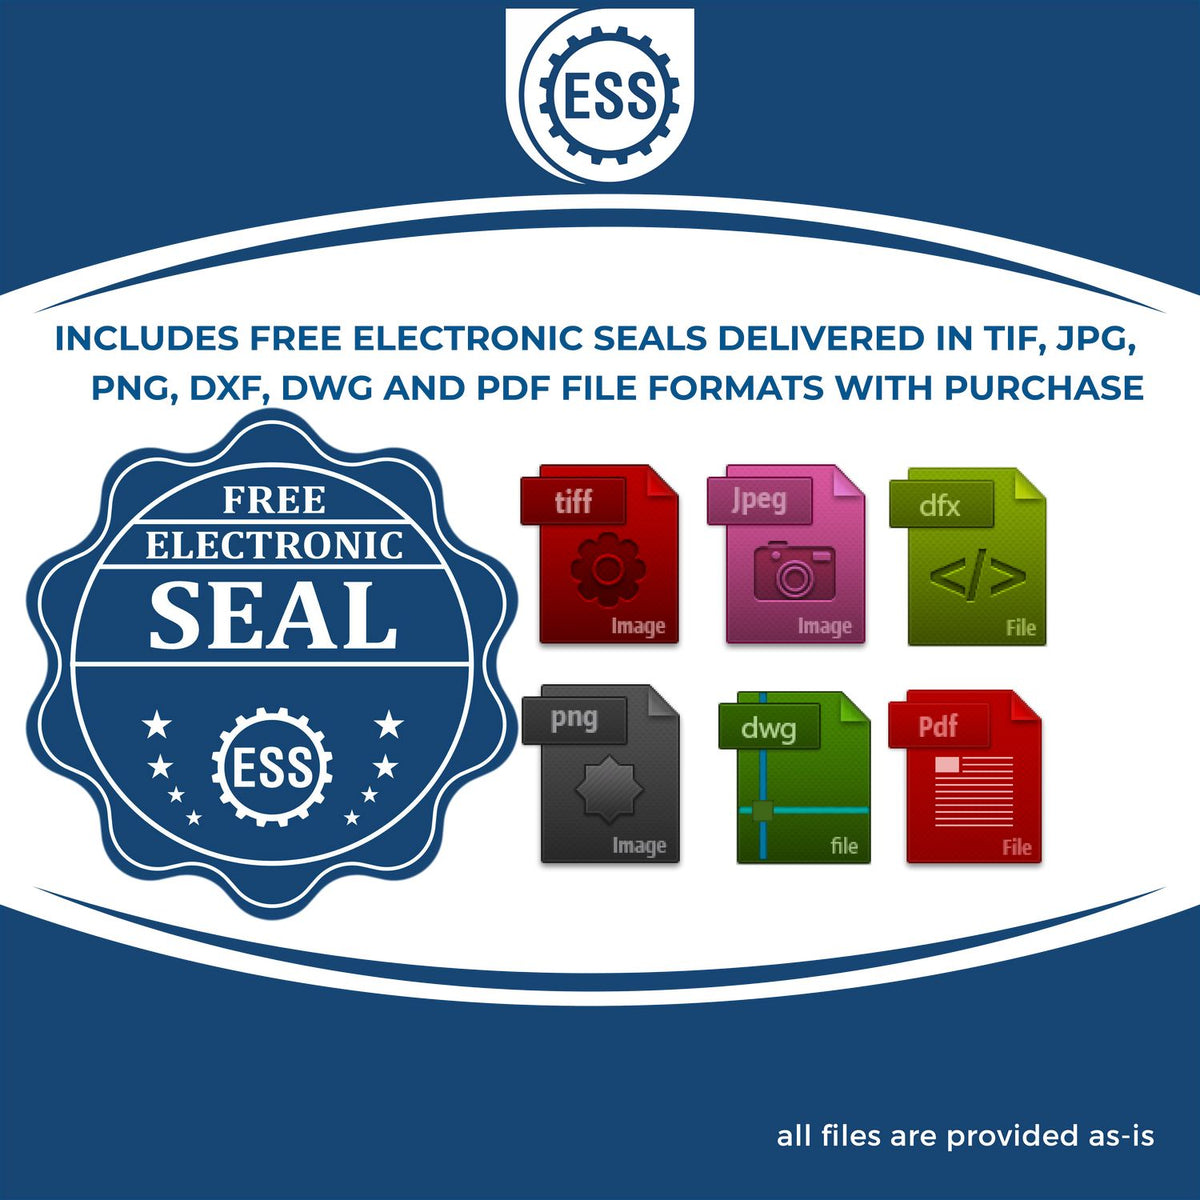 An infographic for the free electronic seal for the Long Reach Idaho Land Surveyor Seal illustrating the different file type icons such as DXF, DWG, TIF, JPG and PNG.